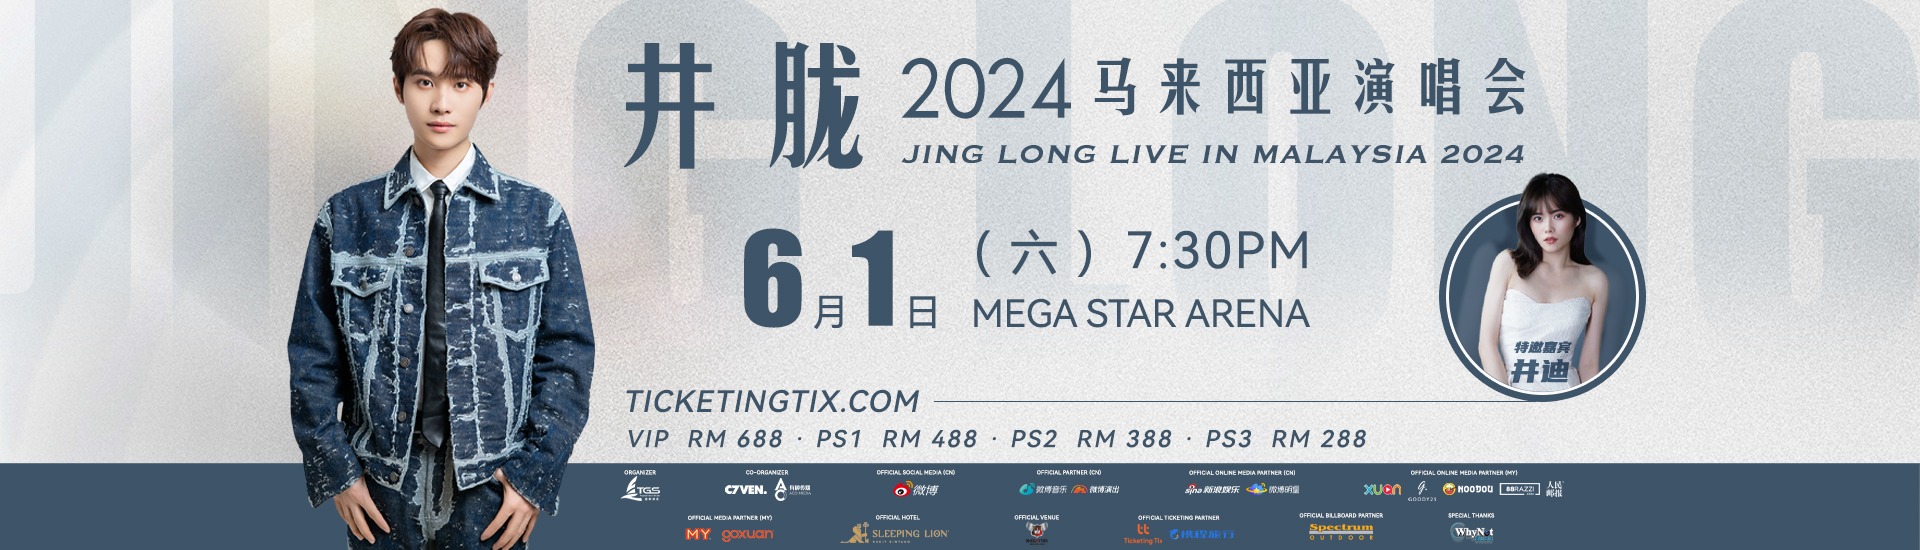 Jing Long’s Highly Anticipated Concert to Sweep Malaysia in 2024